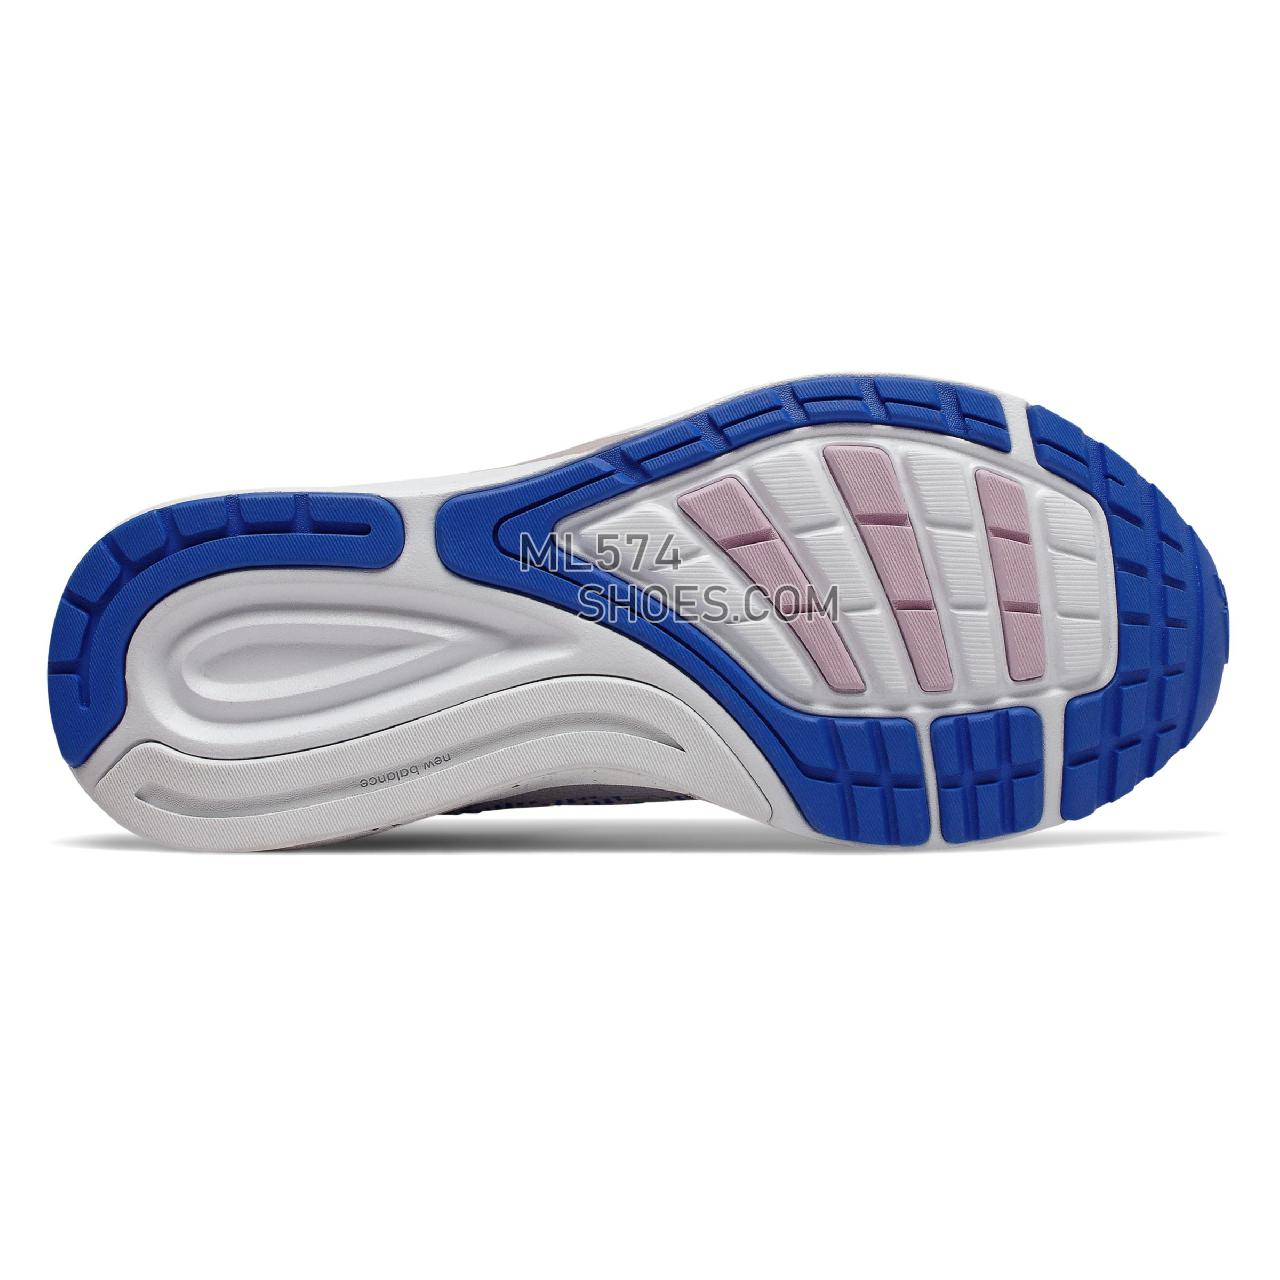 New Balance 870v5 - Women's Stability Running - White with Vivid Cobalt and Oxygen Pink - W870WB5